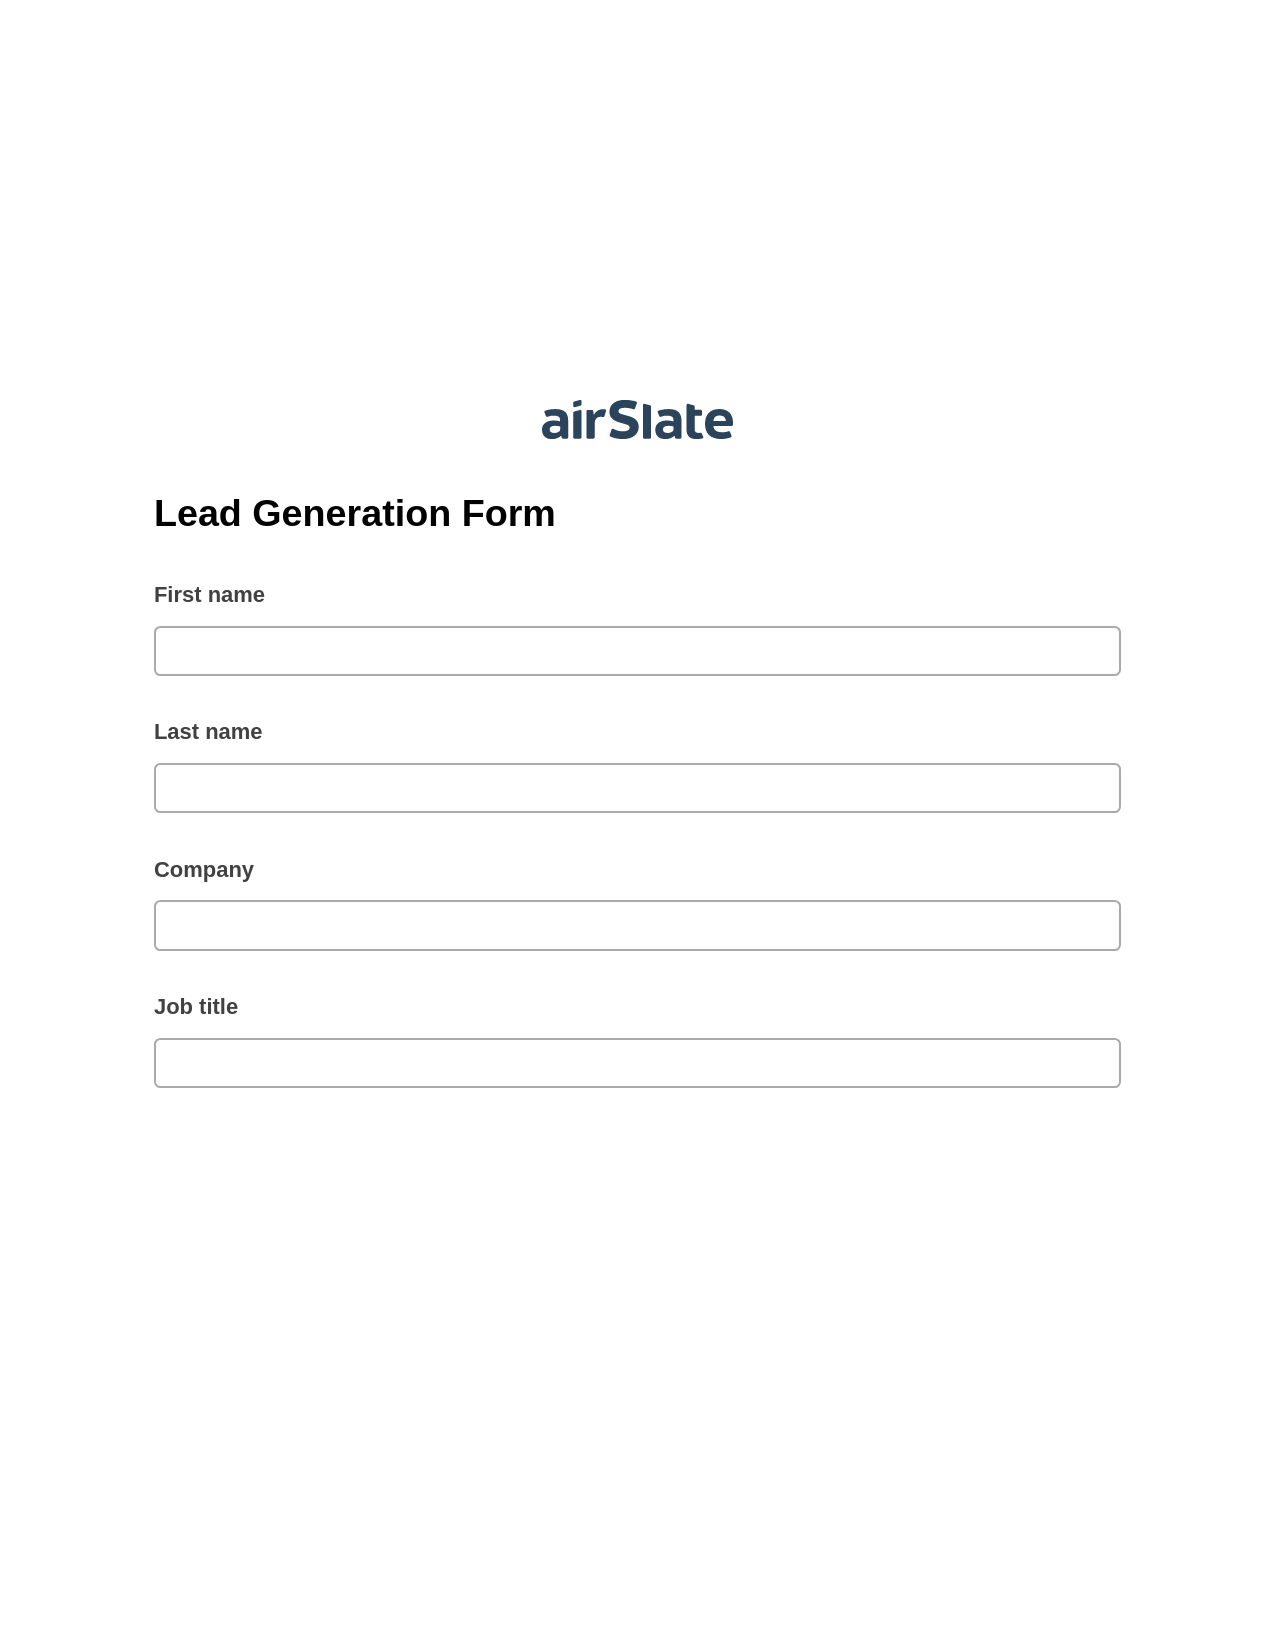 Lead Generation Form Pre-fill from Google Sheets Bot, Send a Slate with Roles Bot, Webhook Postfinish Bot